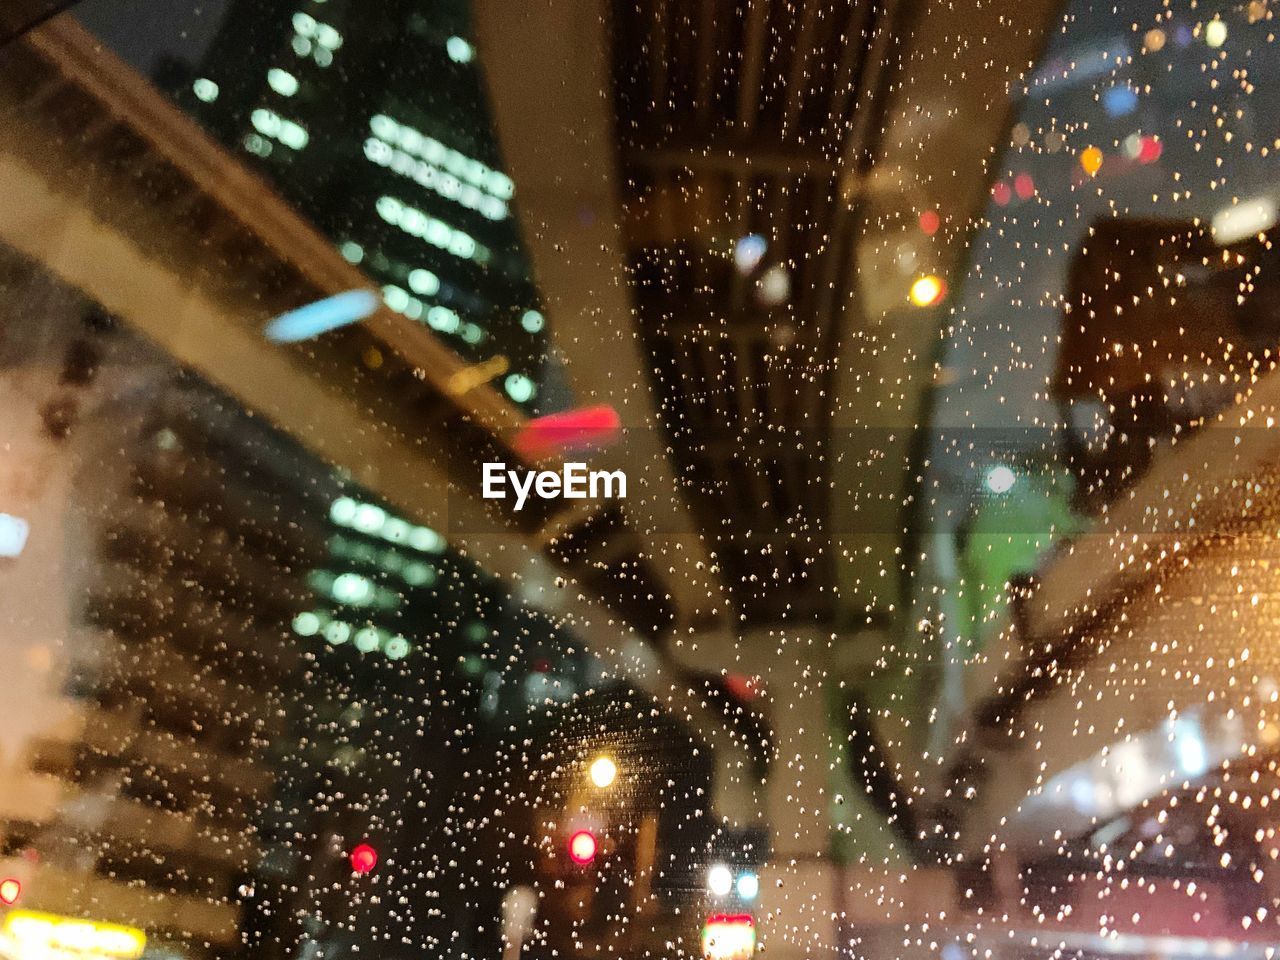 Buildings seen through wet glass window at night